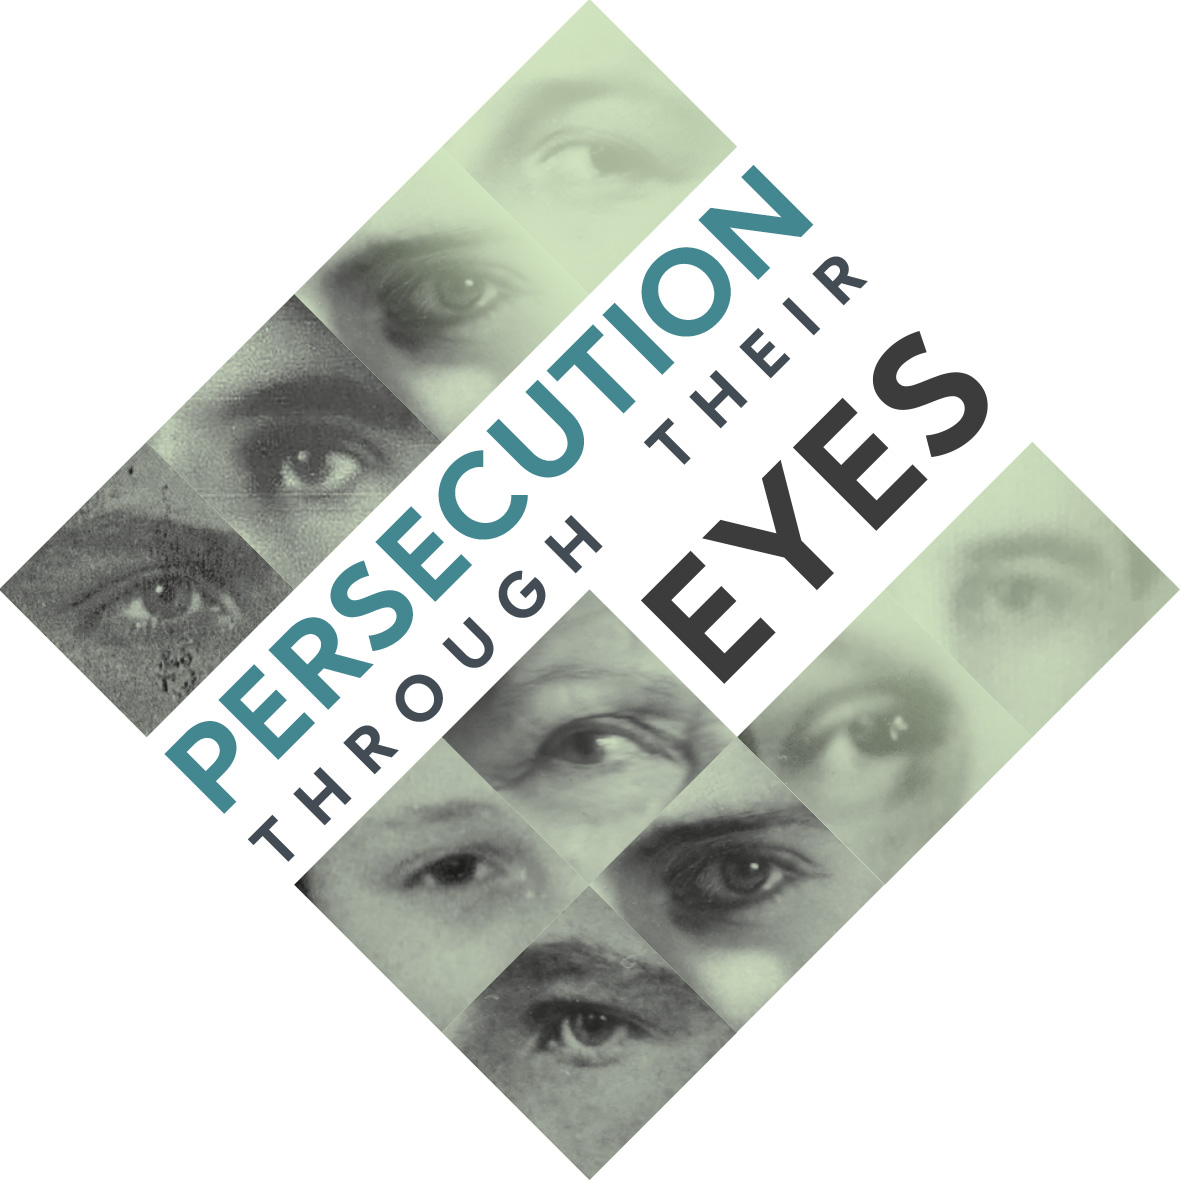 Il progetto “Persecution through their Eyes” prossimi passi